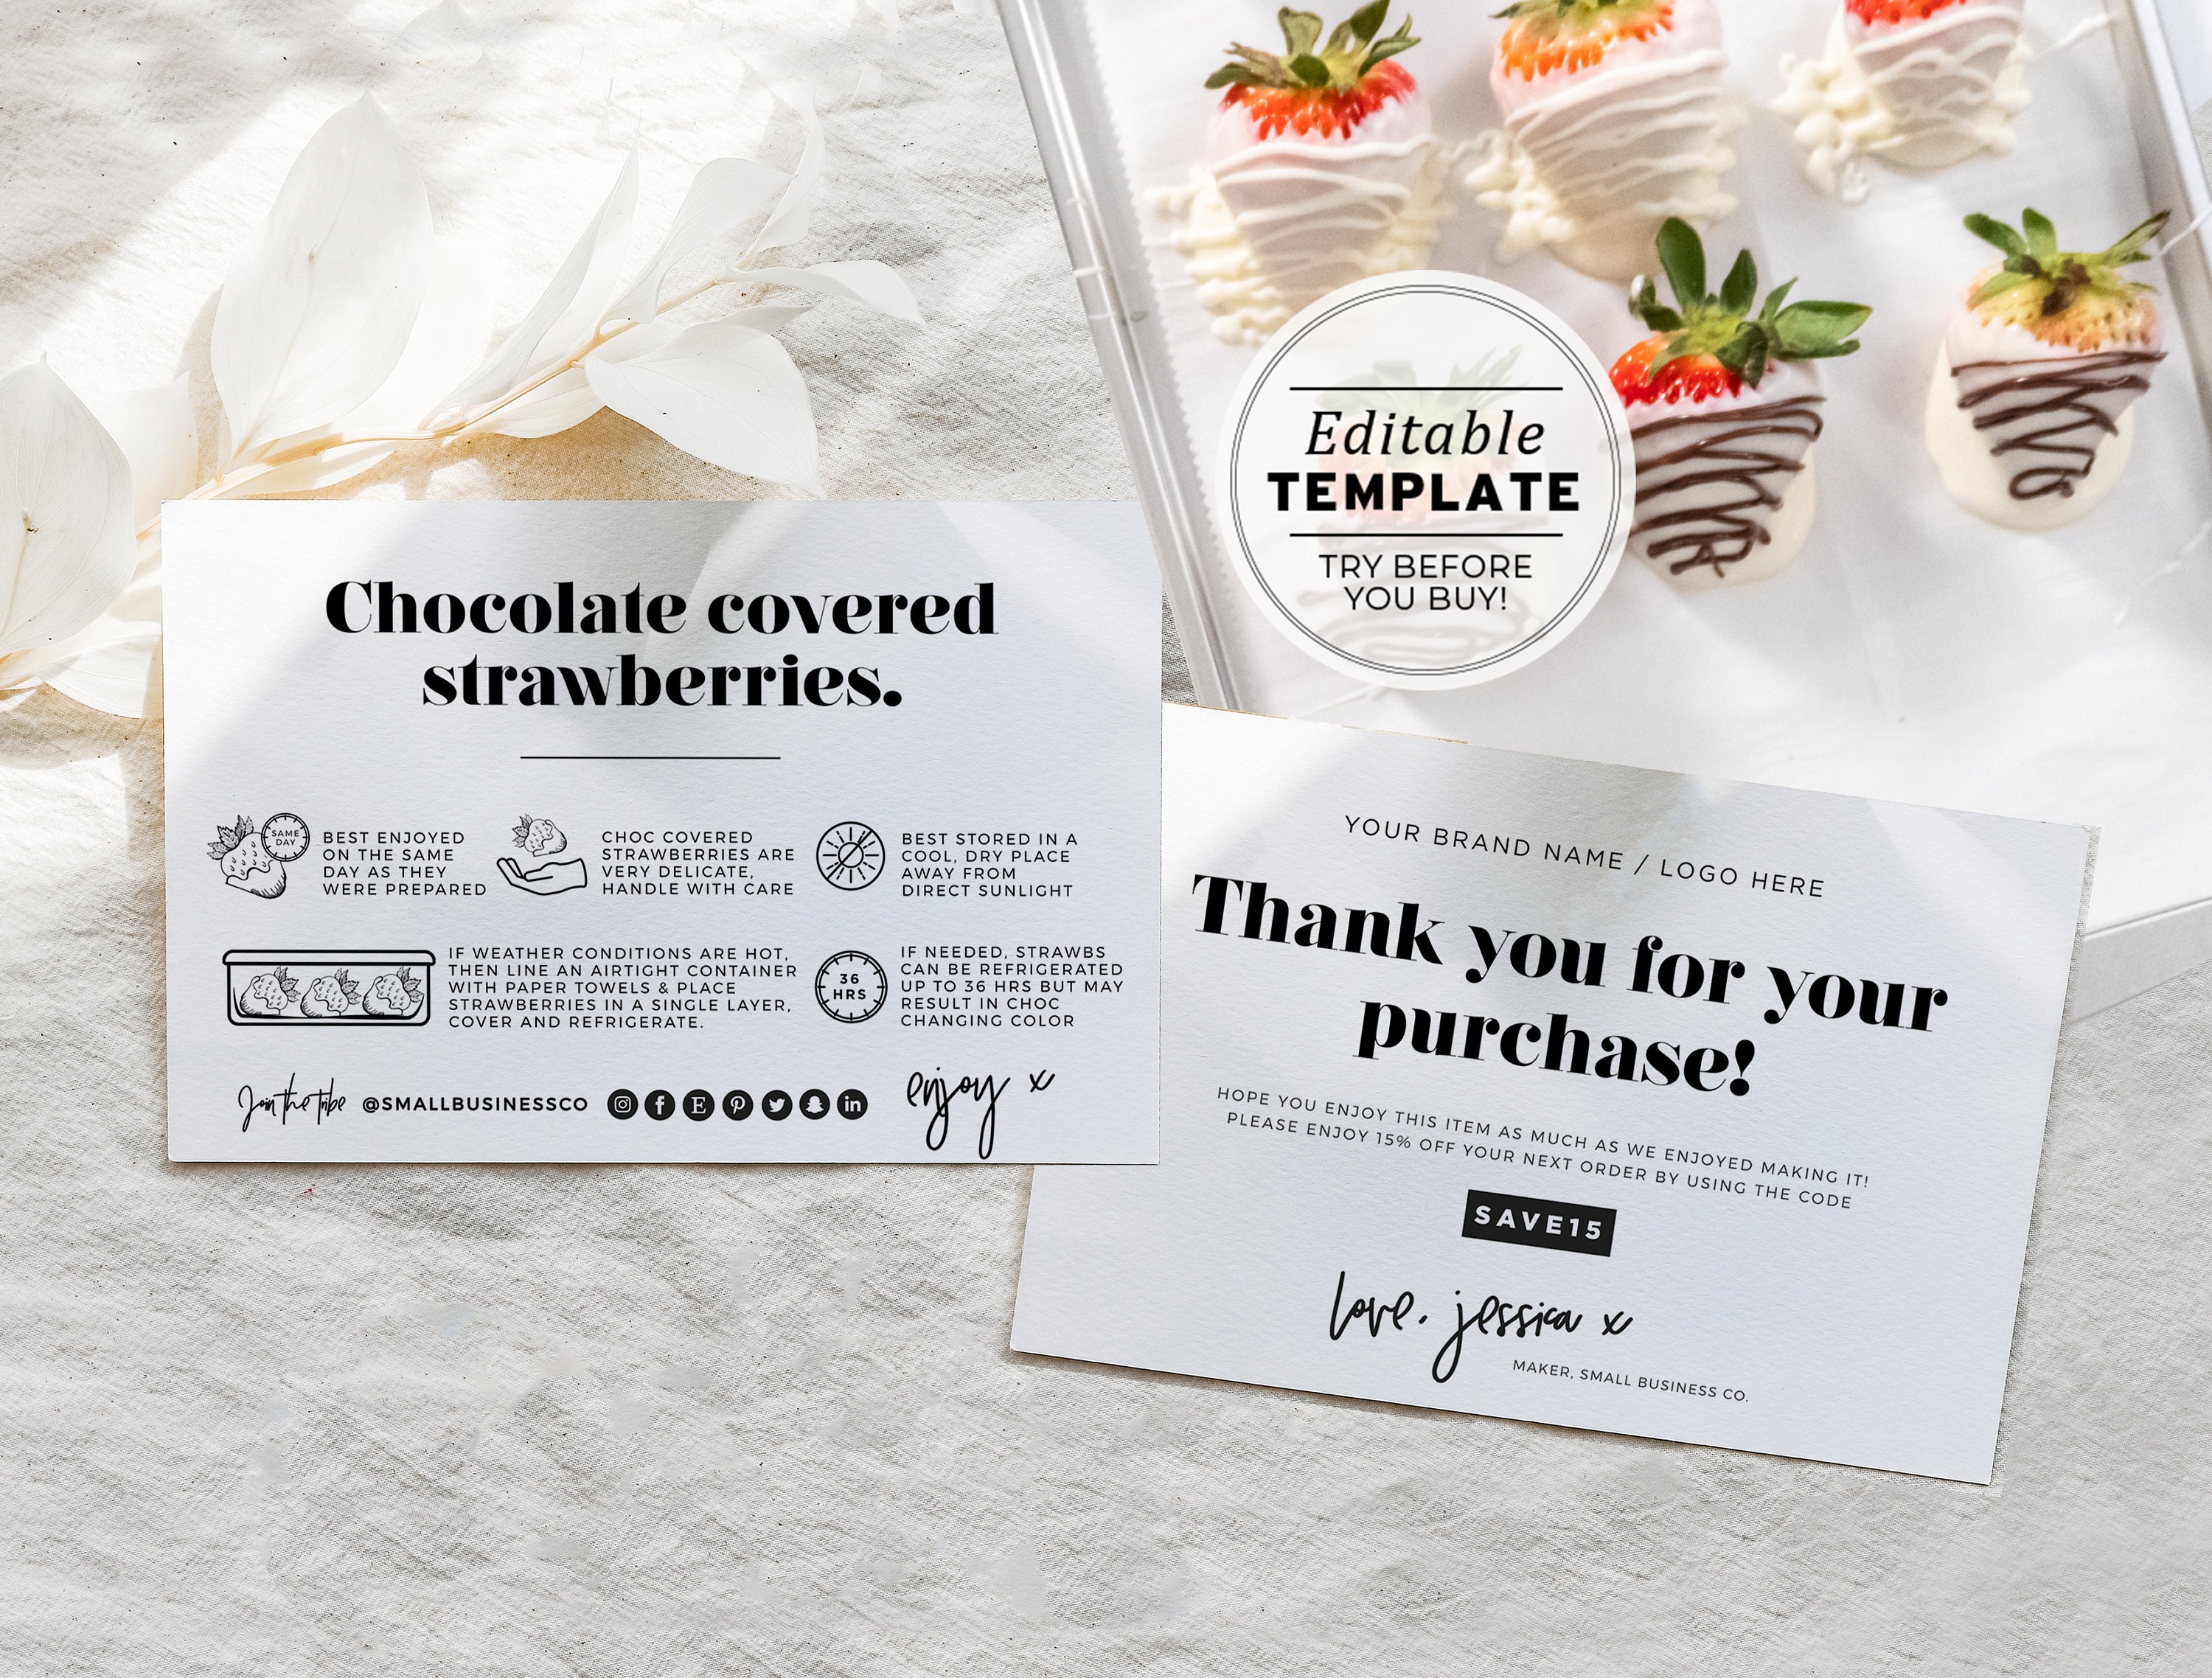 Minimalist Chocolate Covered Strawberries Card and Thank You Card